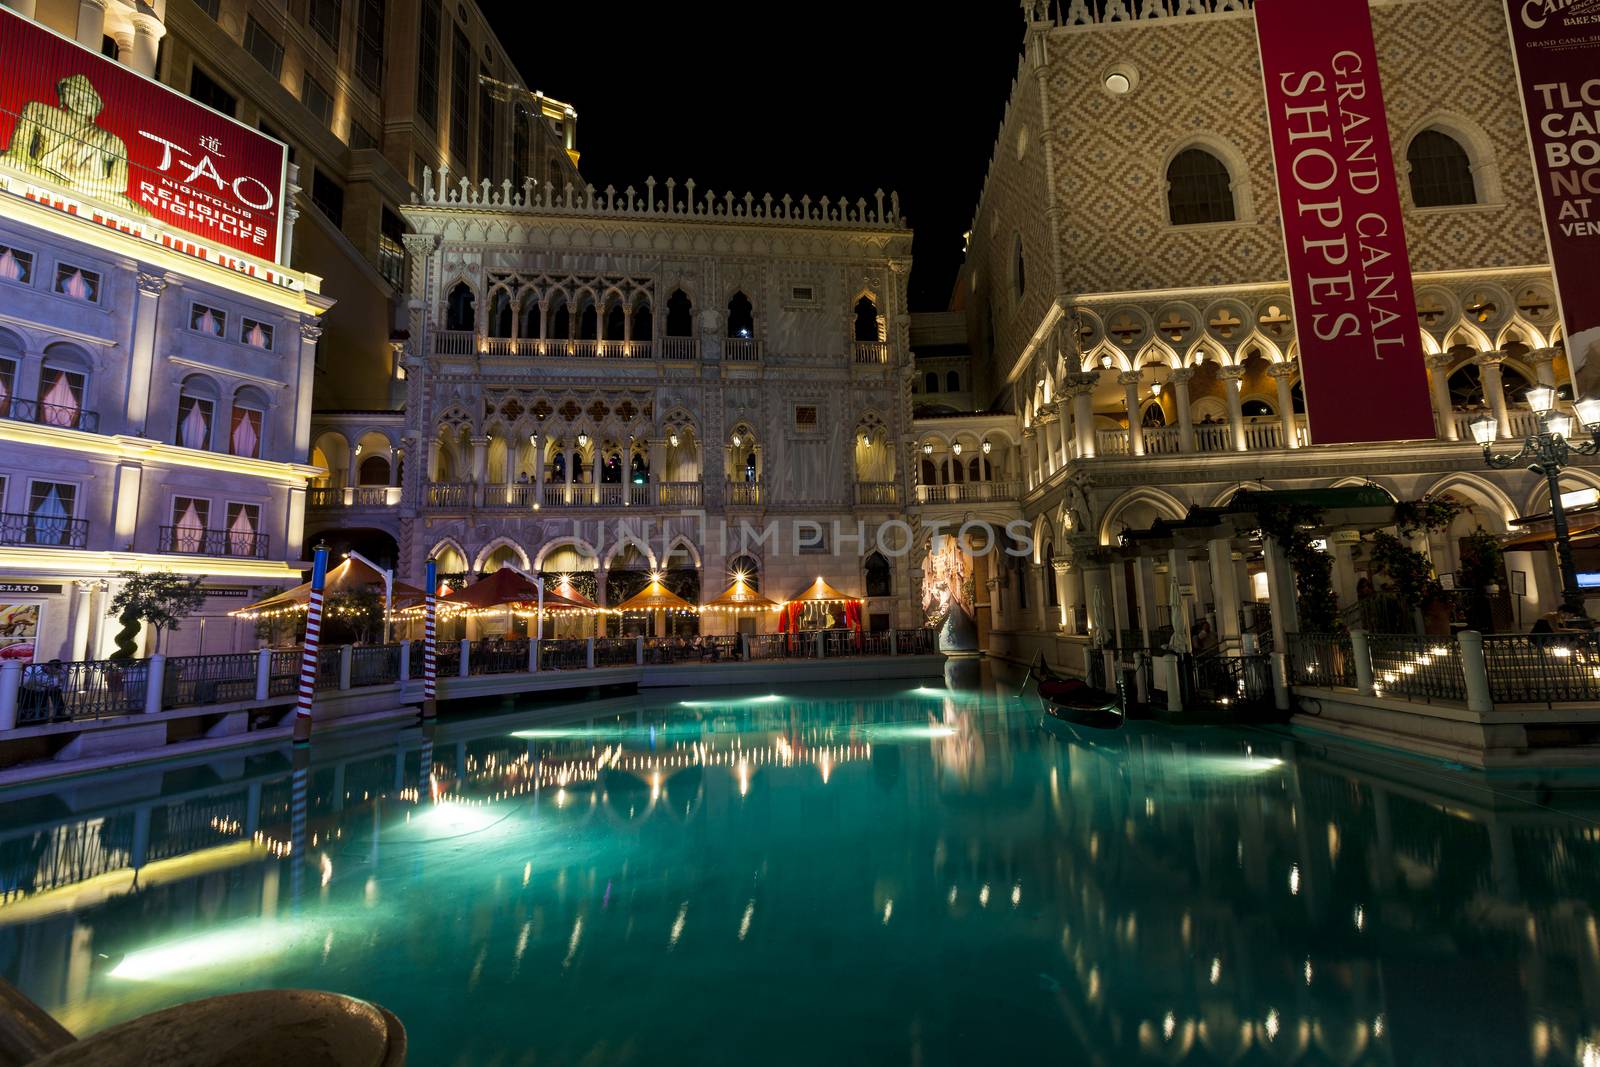 LAS VEGAS USA JULY 7 2015: The Venetian Resort Hotel & Casino The resort opened on May 3, 1999 with flutter of white doves, sounding trumpets, singing gondoliers and actress Sophia Loren.